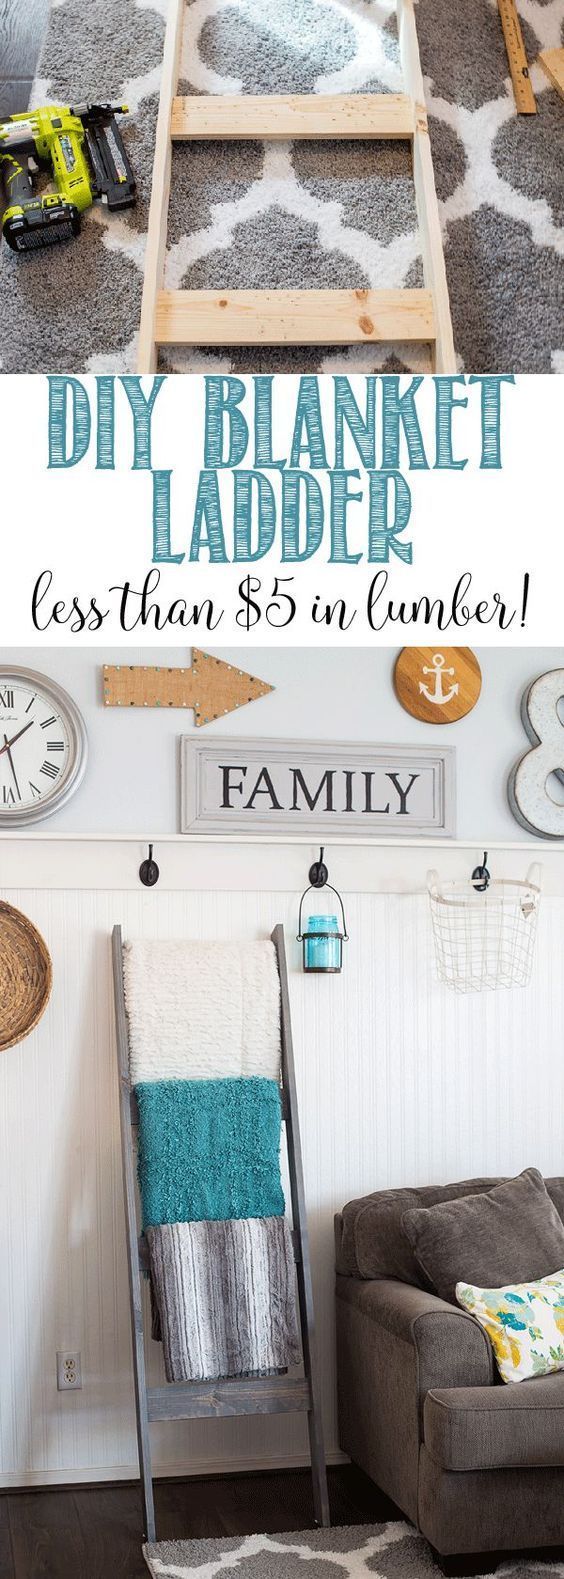 DIY Blanket Ladder for less than $5 in lumber!!!! - DIY Blanket Ladder for less than $5 in lumber!!!! -   17 diy Projects for college ideas